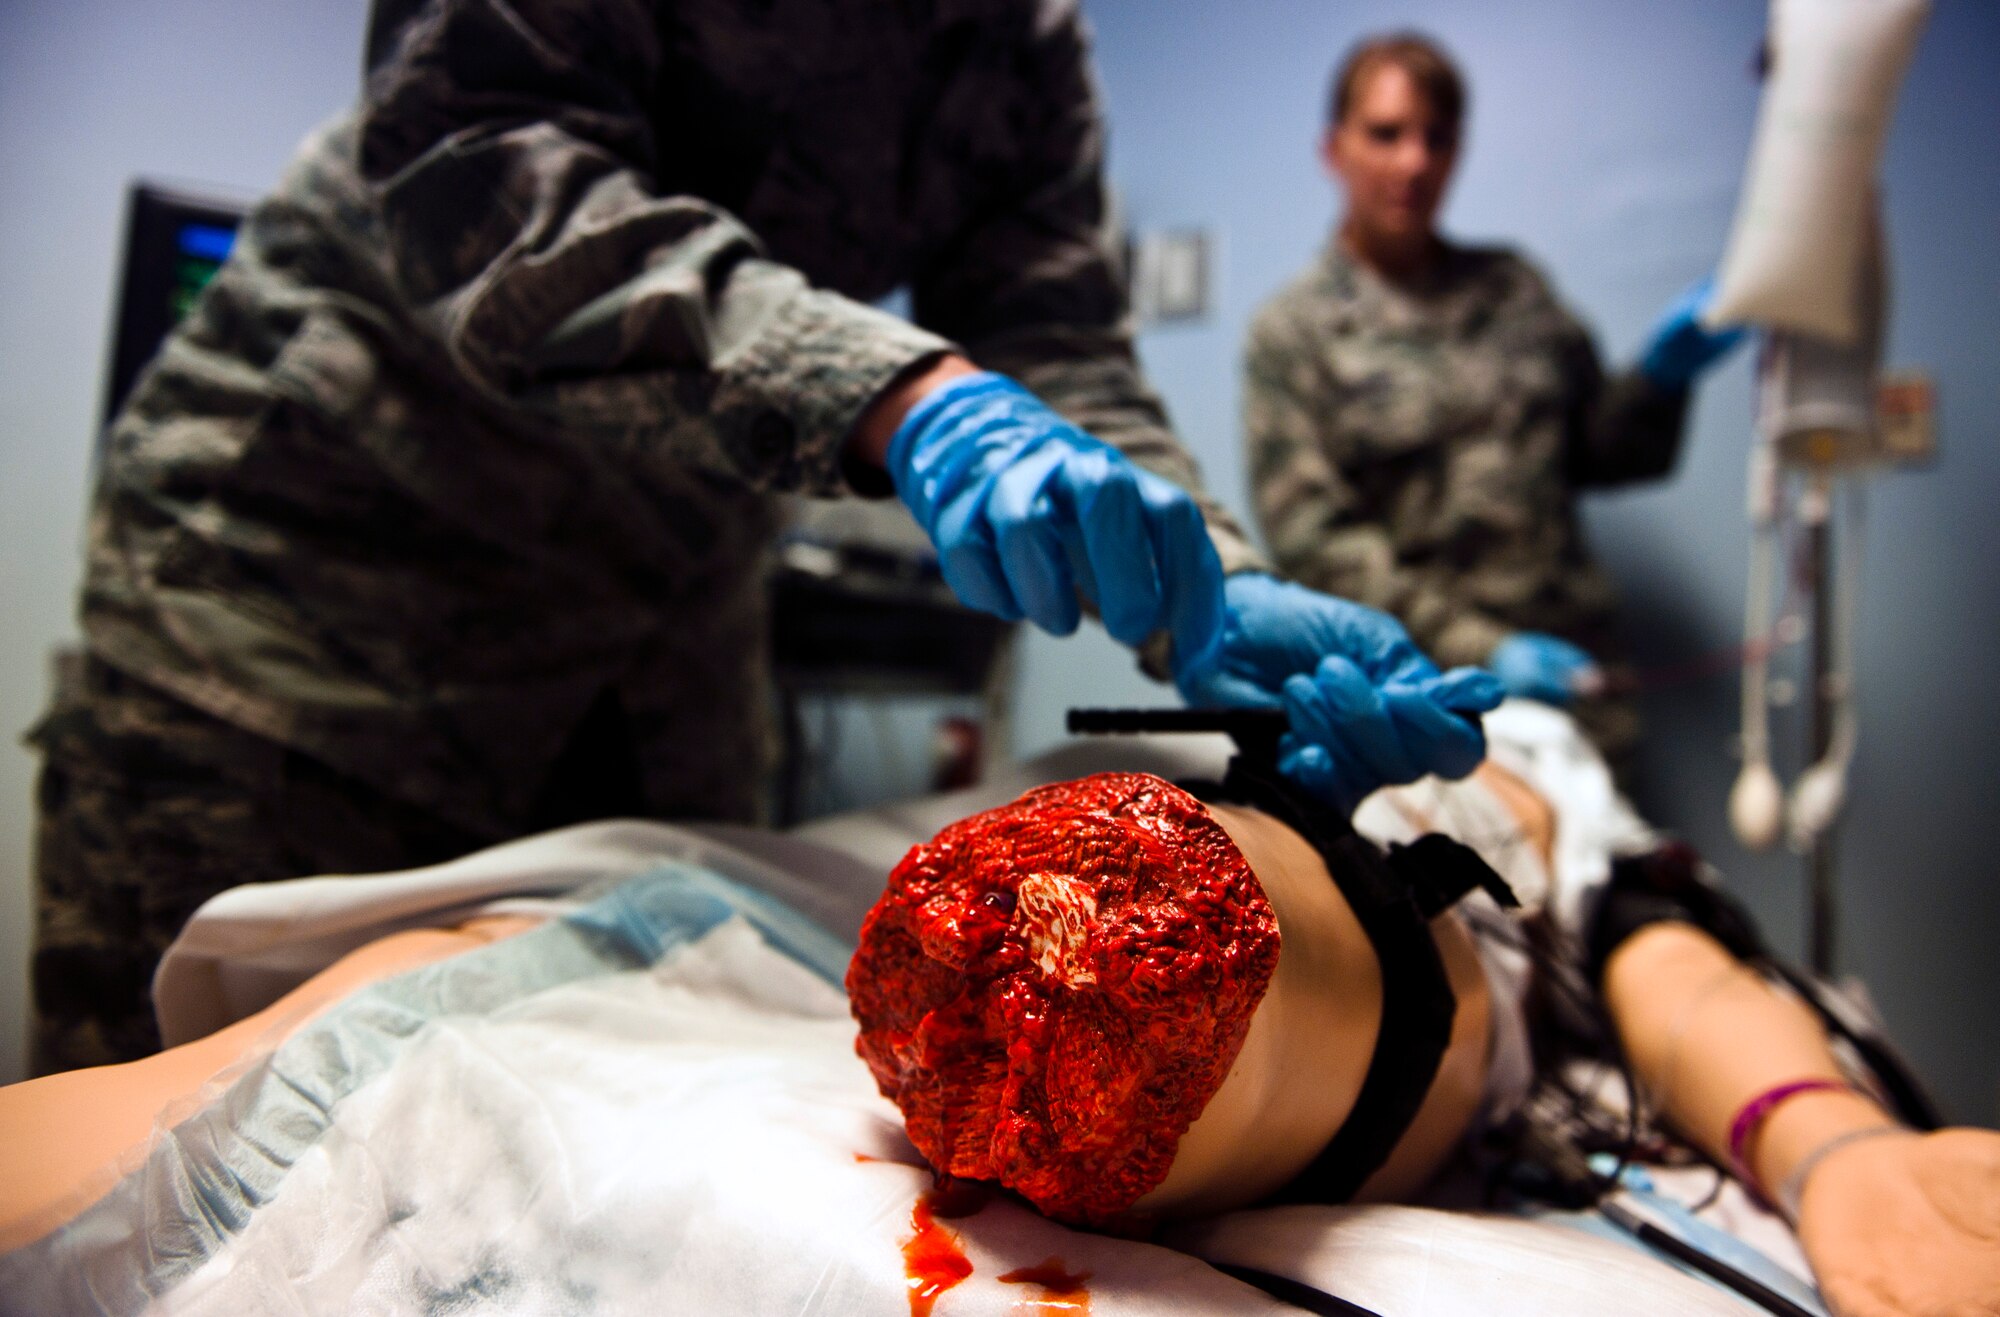 Airman 1st Class Valerie Essman, 39th Medical Operations Squadron ambulance serviceman, applies a tourniquet to a Sim Man medical dummy to keep it from bleeding out June 19, 2013, at Incirlik Air Base, Turkey. The Sim Man gives Airmen the opportunity to train on a controlled human-like patient. (U.S. Air Force photo by Senior Airman Daniel Phelps/Released)